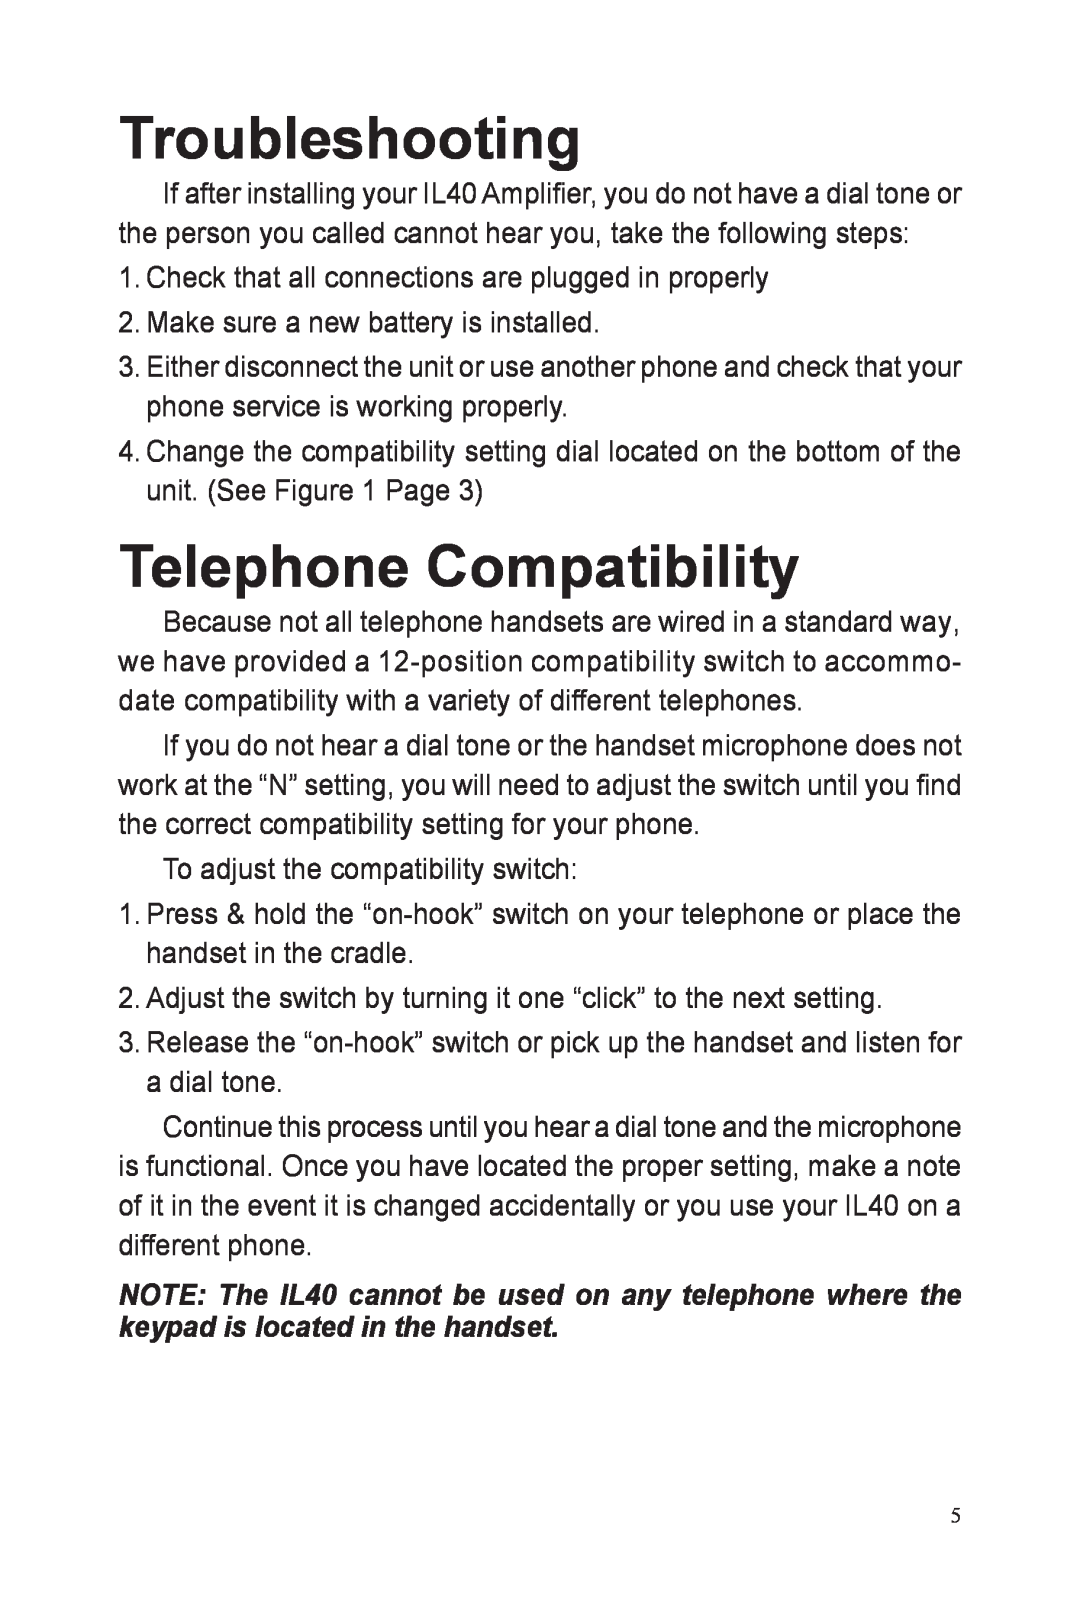 ClearSounds IL40 manual Troubleshooting, Telephone Compatibility 